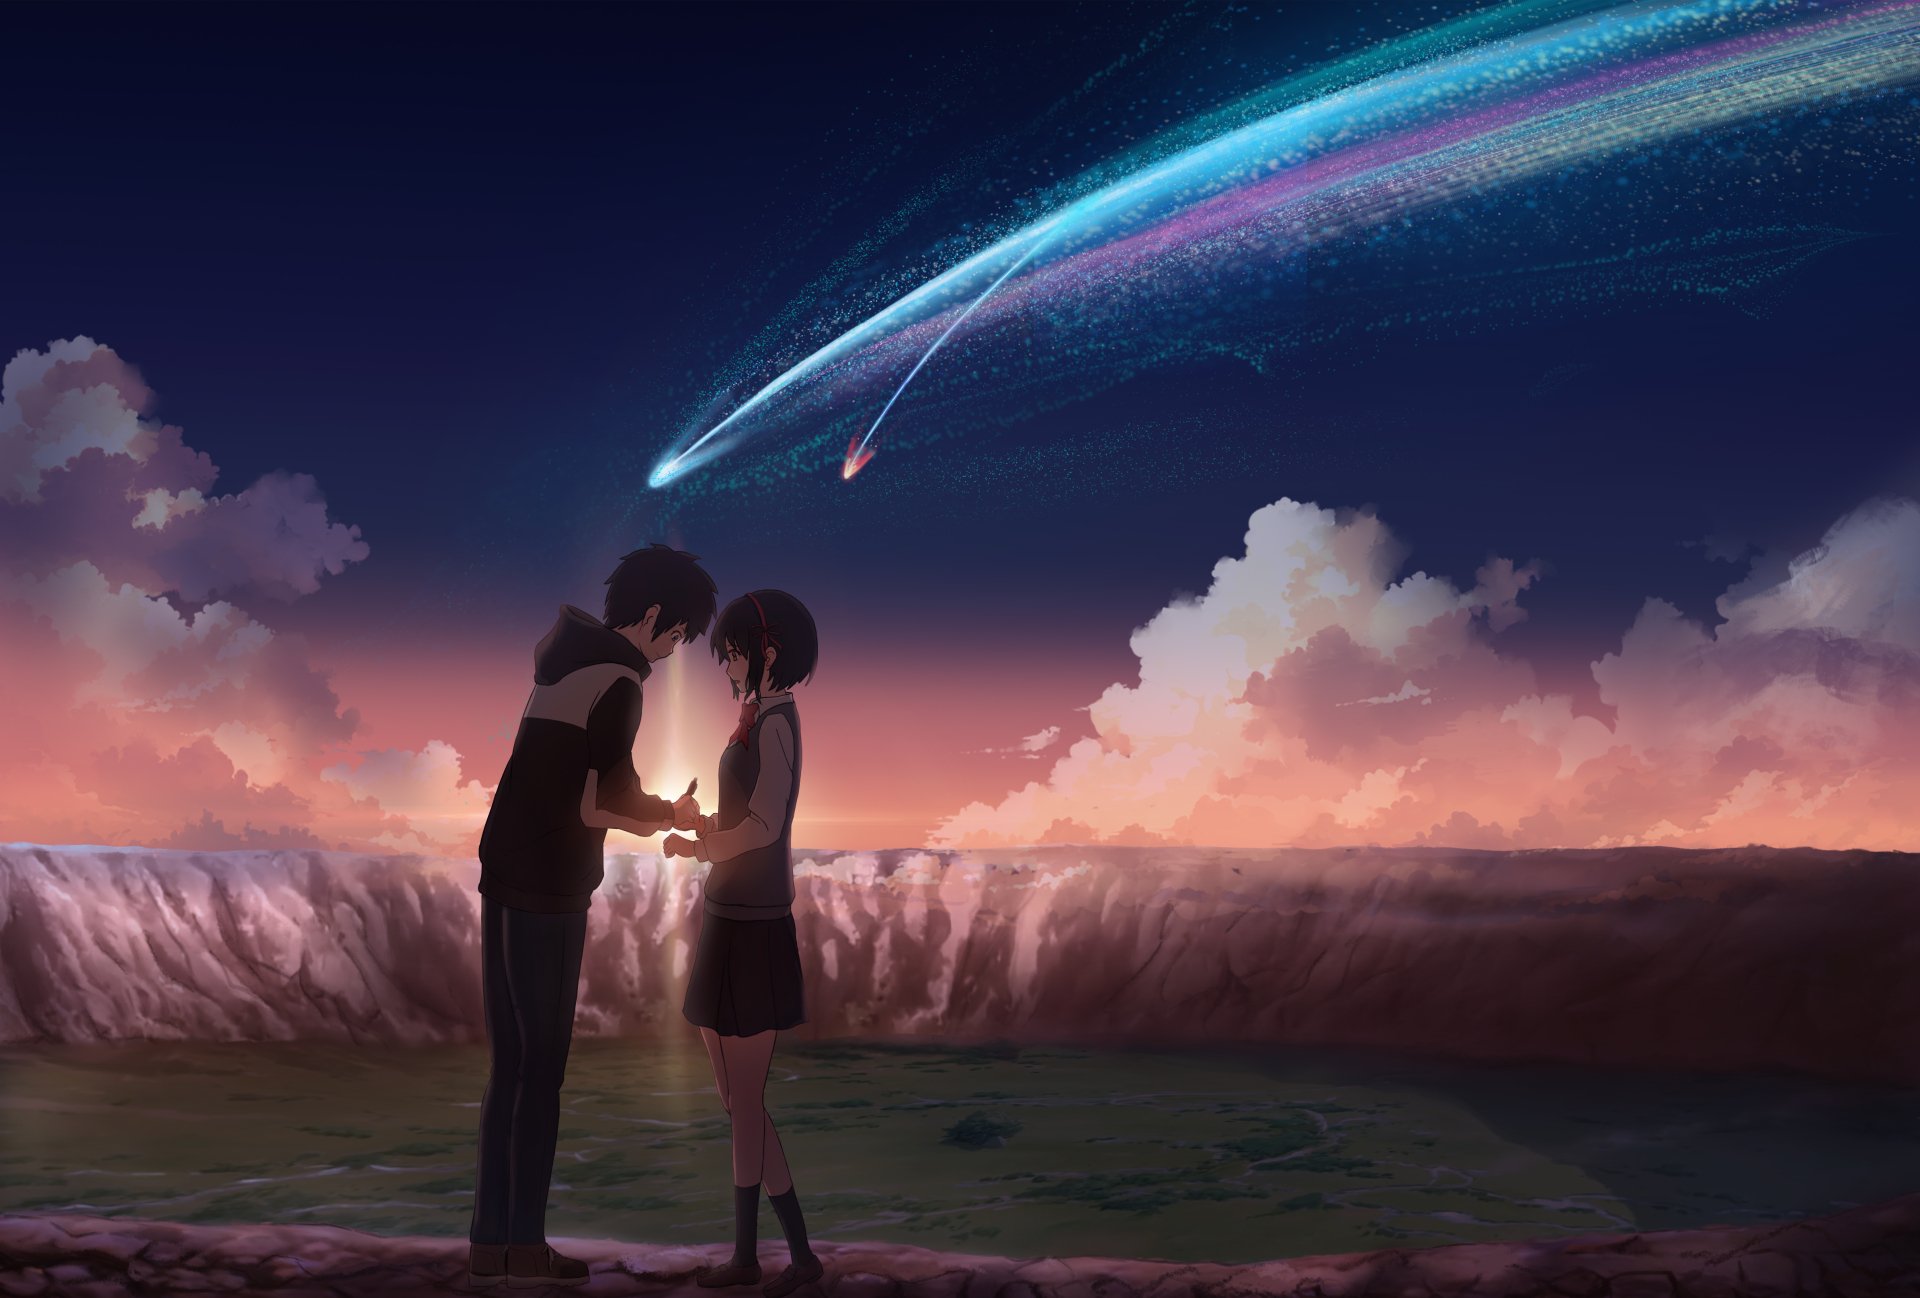  Your  Name  4k  Ultra HD Wallpaper  Background  Image 